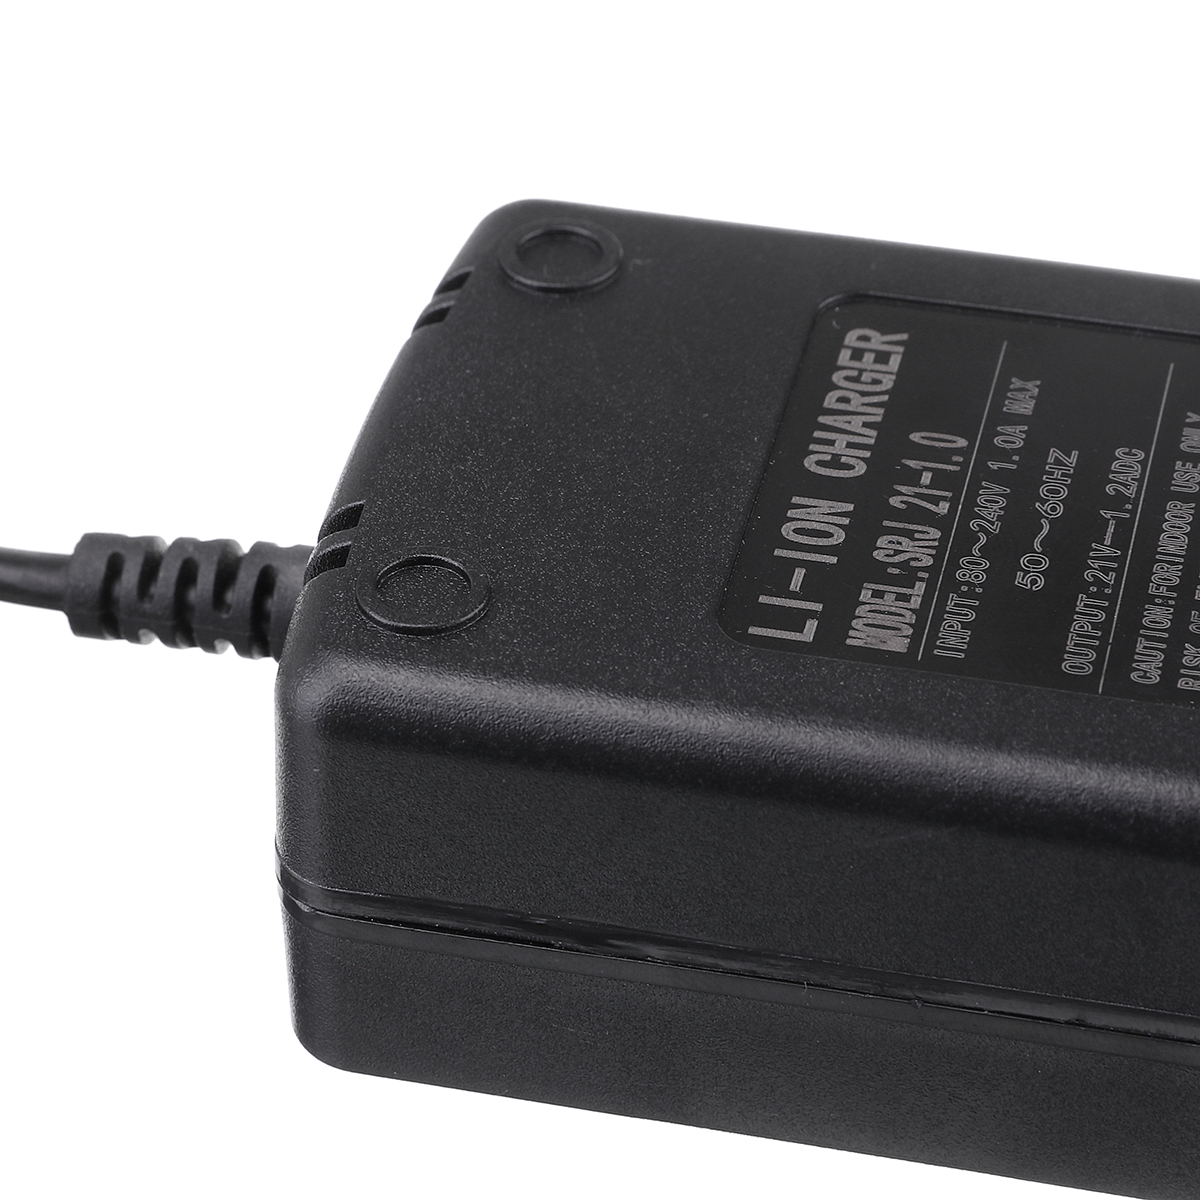 18V--21V-Lithium-Battery-Charger-Supply-DC-80-240V-Switching-Power-Wall-Charger-For-Makita-Battery-1747823-7